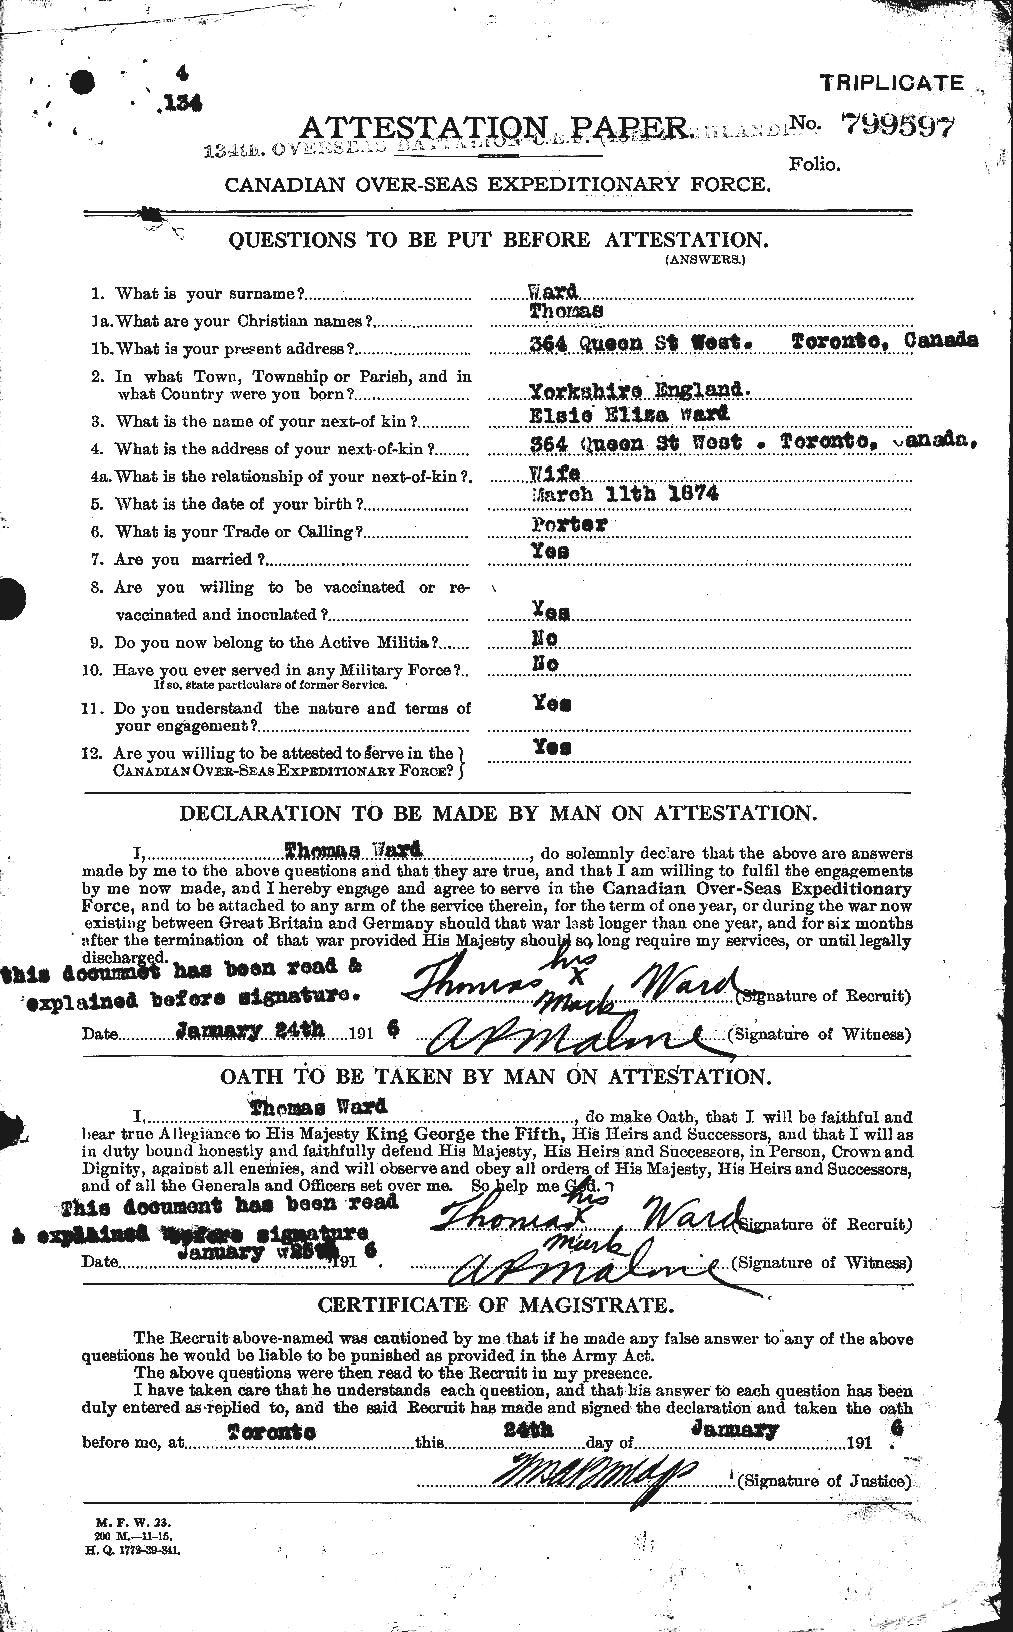 Personnel Records of the First World War - CEF 659717a